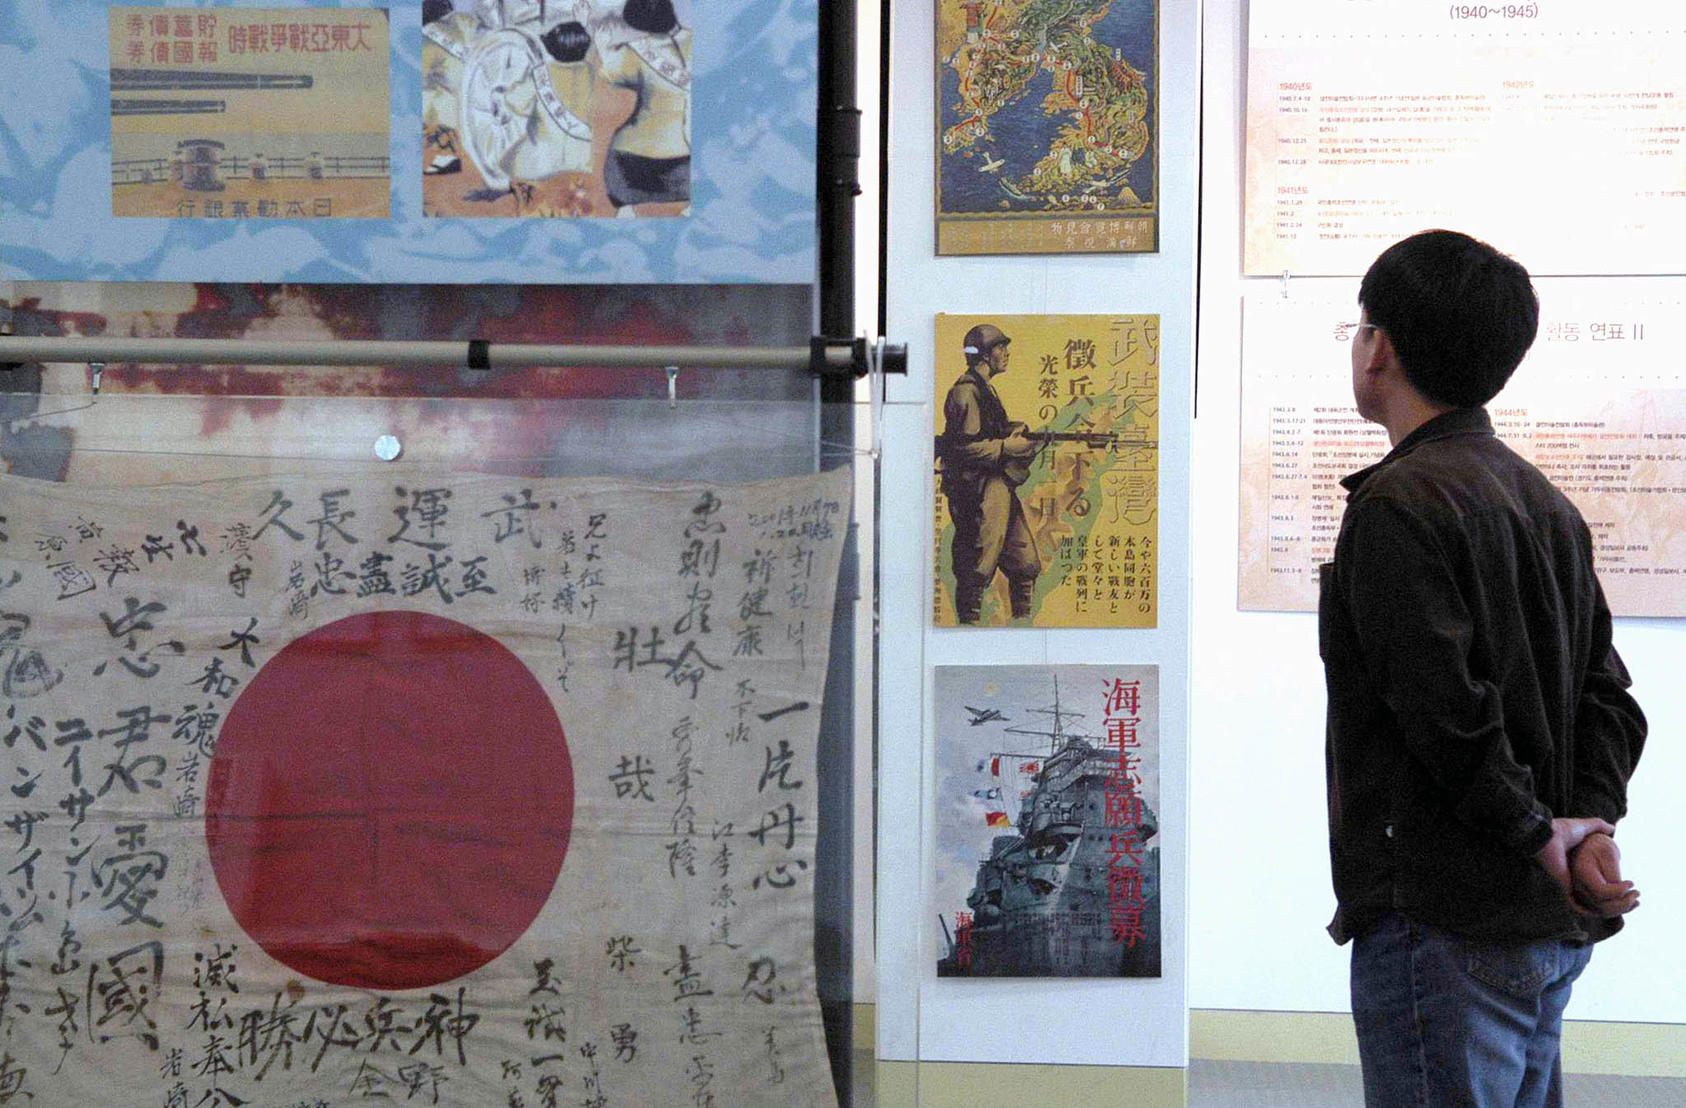 A museum exhibit of pro-Japanese posters from the imperial era, 1910 to 1945, in Seoul, South Korea. December 13, 2004. (Seokyong Lee/The New York Times)